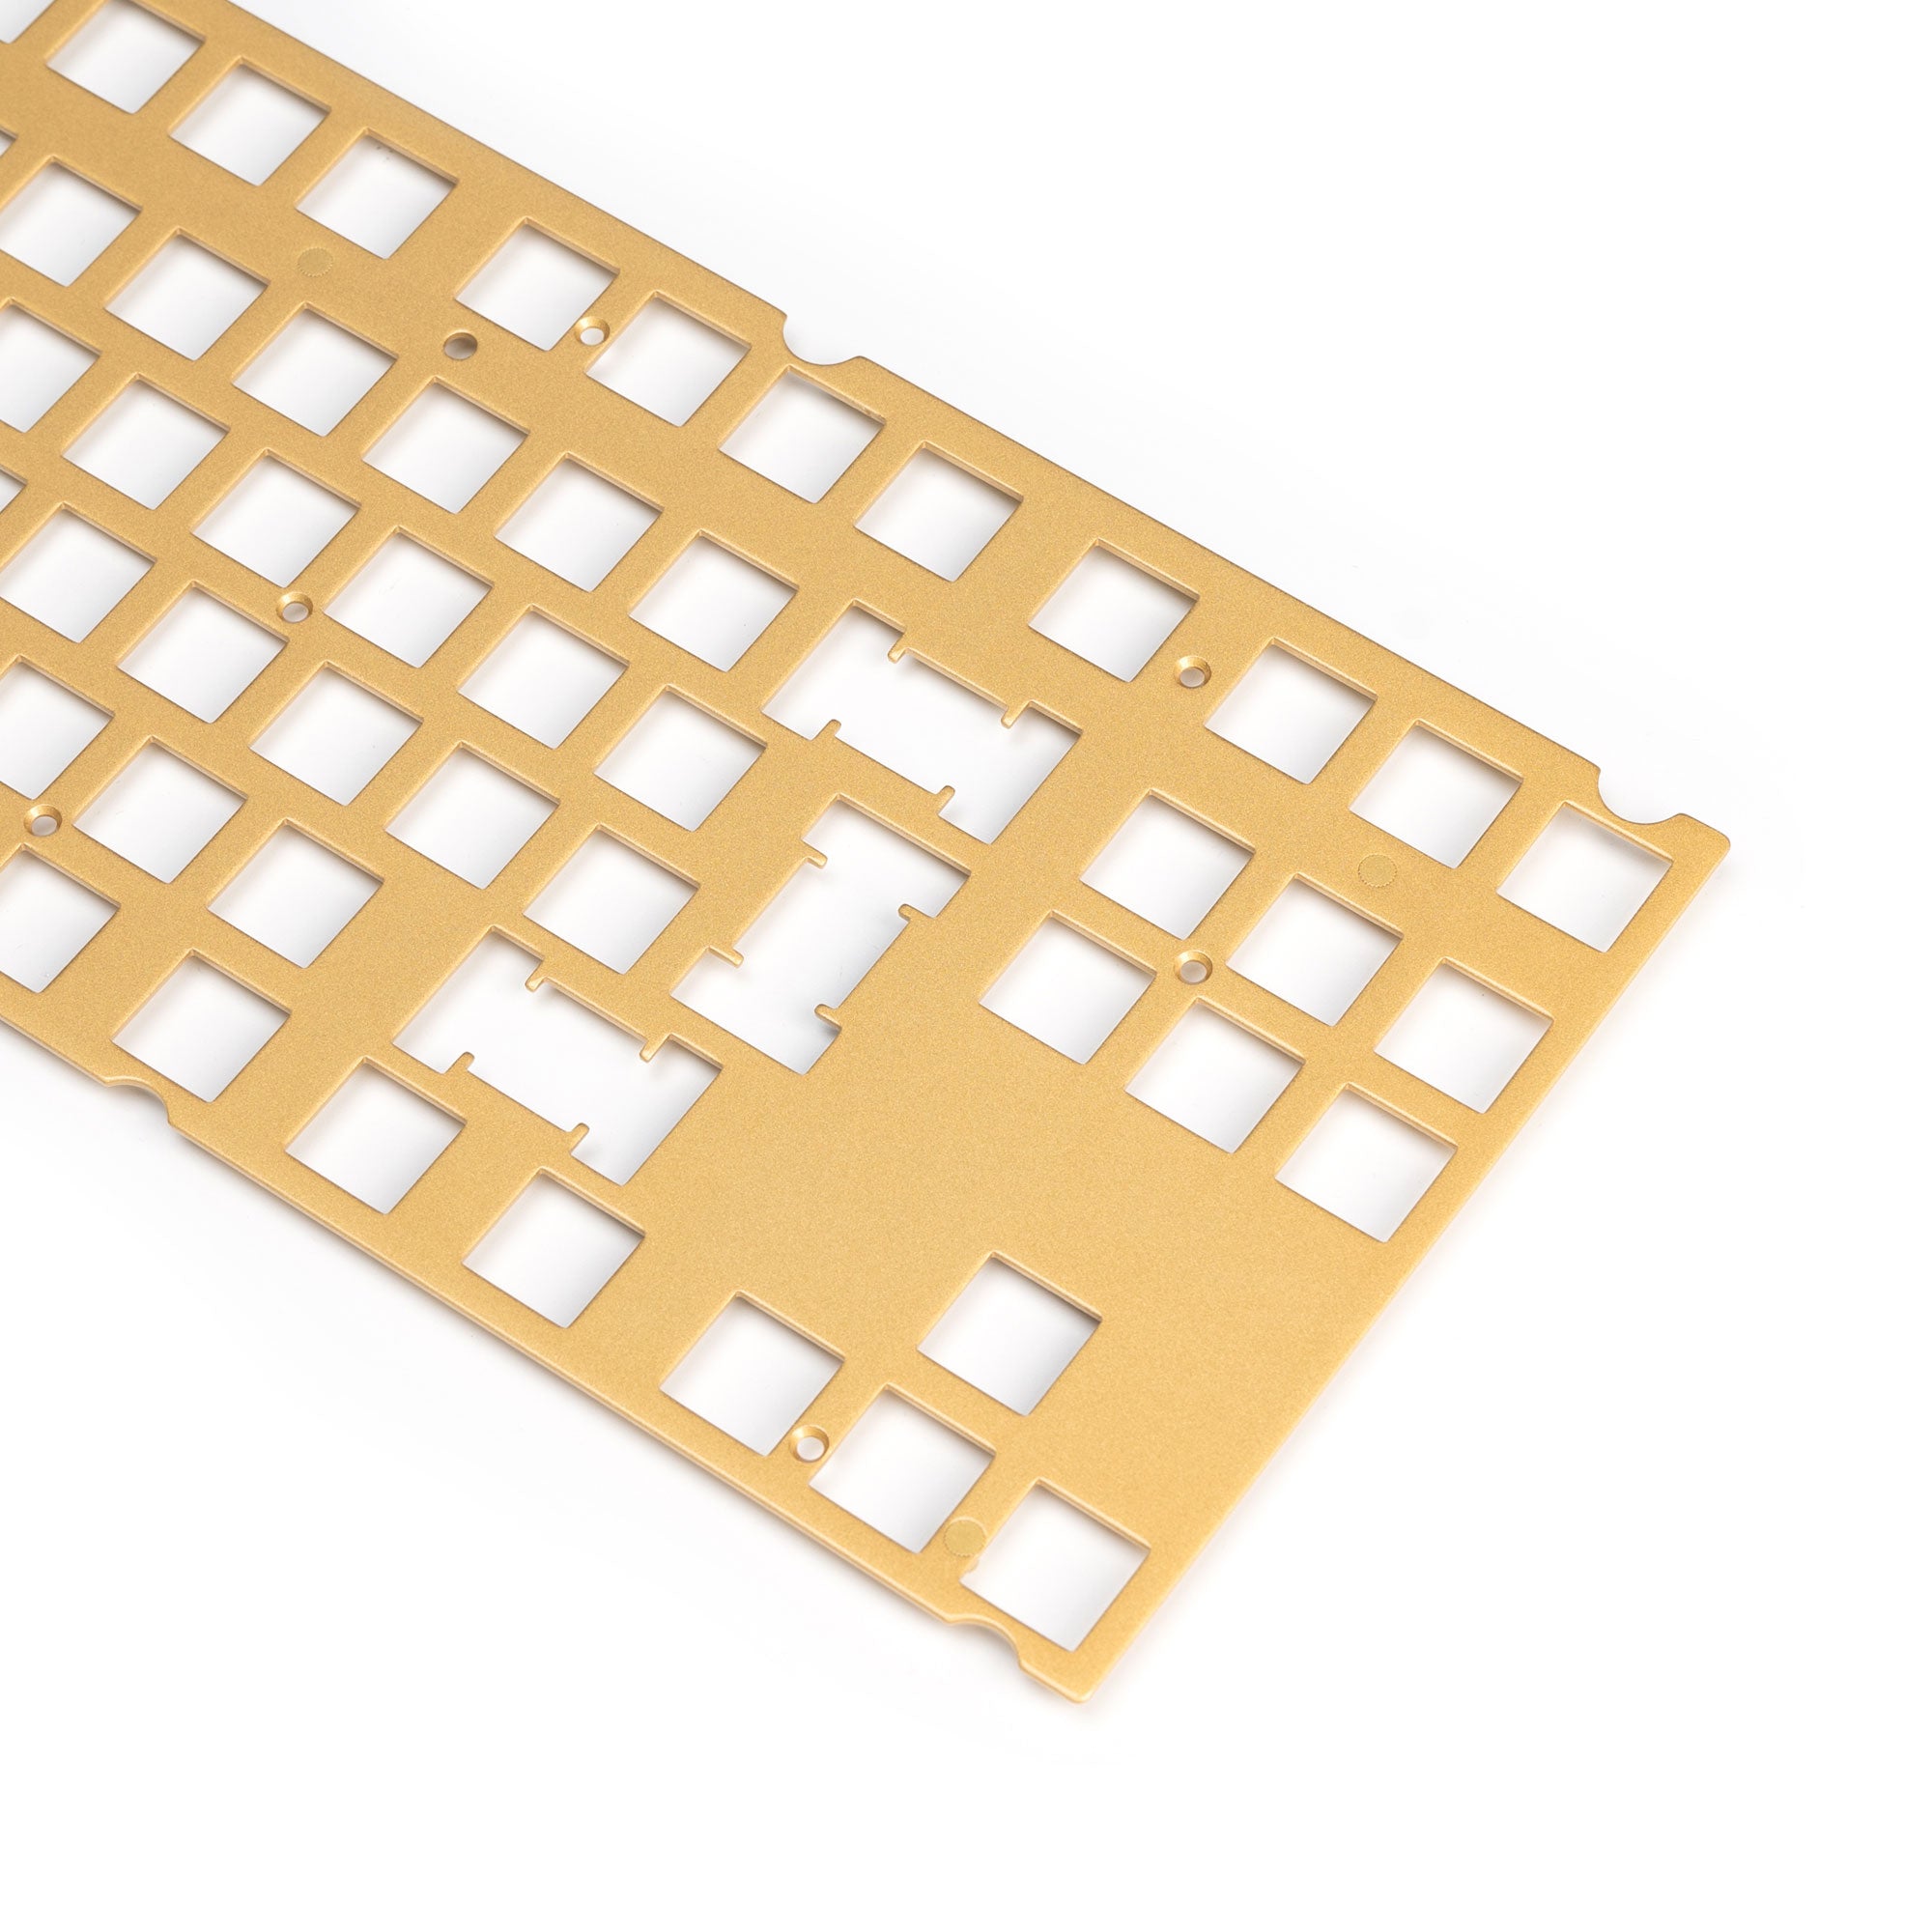 V2 Brass Plate – Keychron | Mechanical Keyboards for Mac, Windows and ...